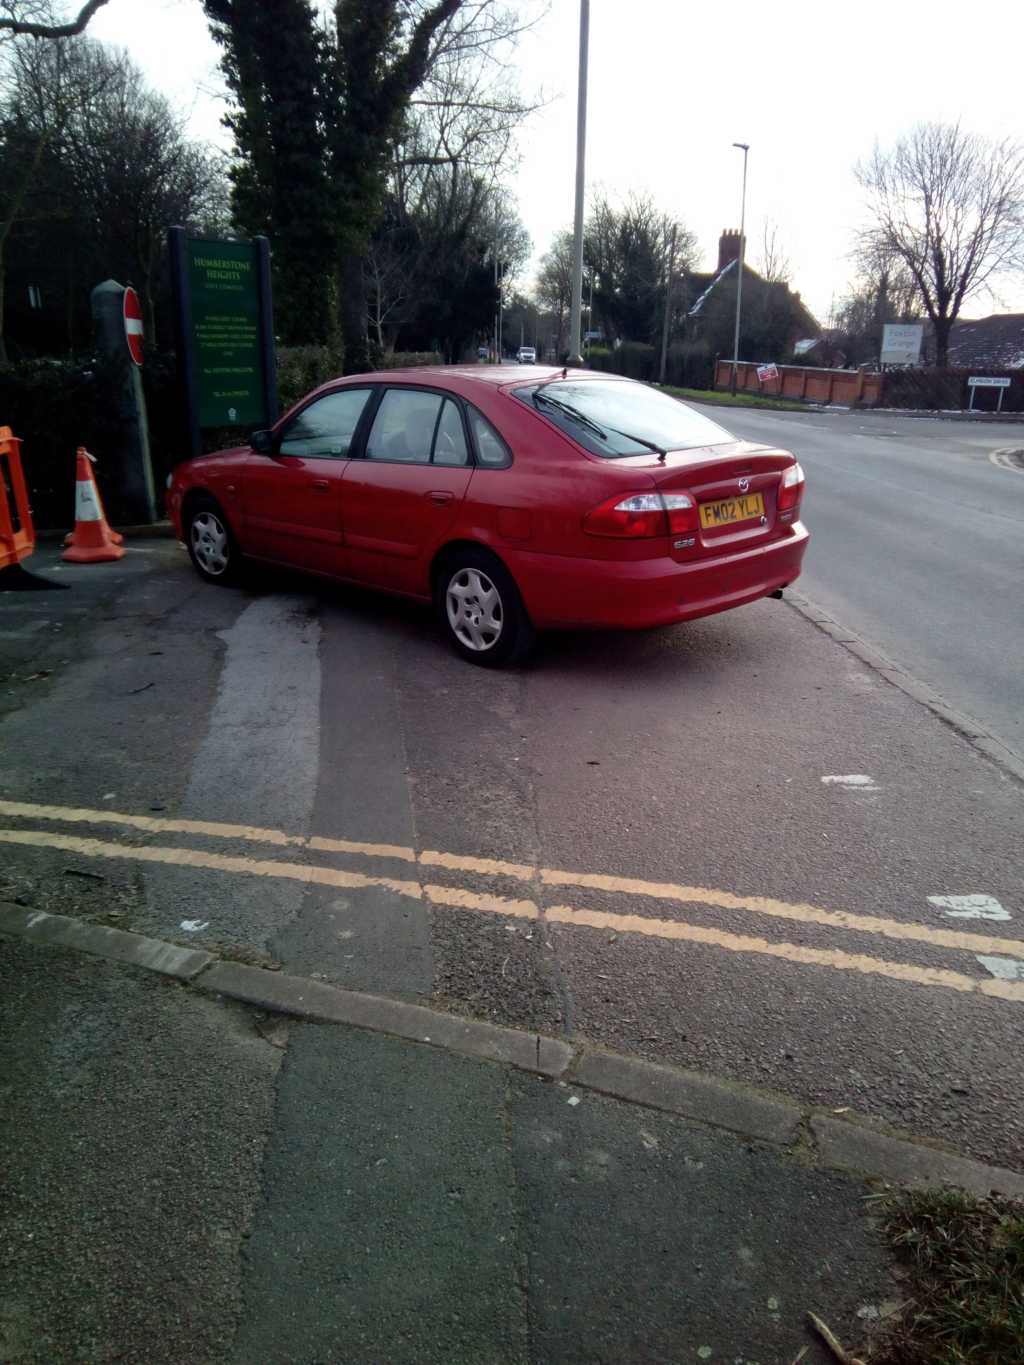 FM02 YLJ is an Inconsiderate Parker